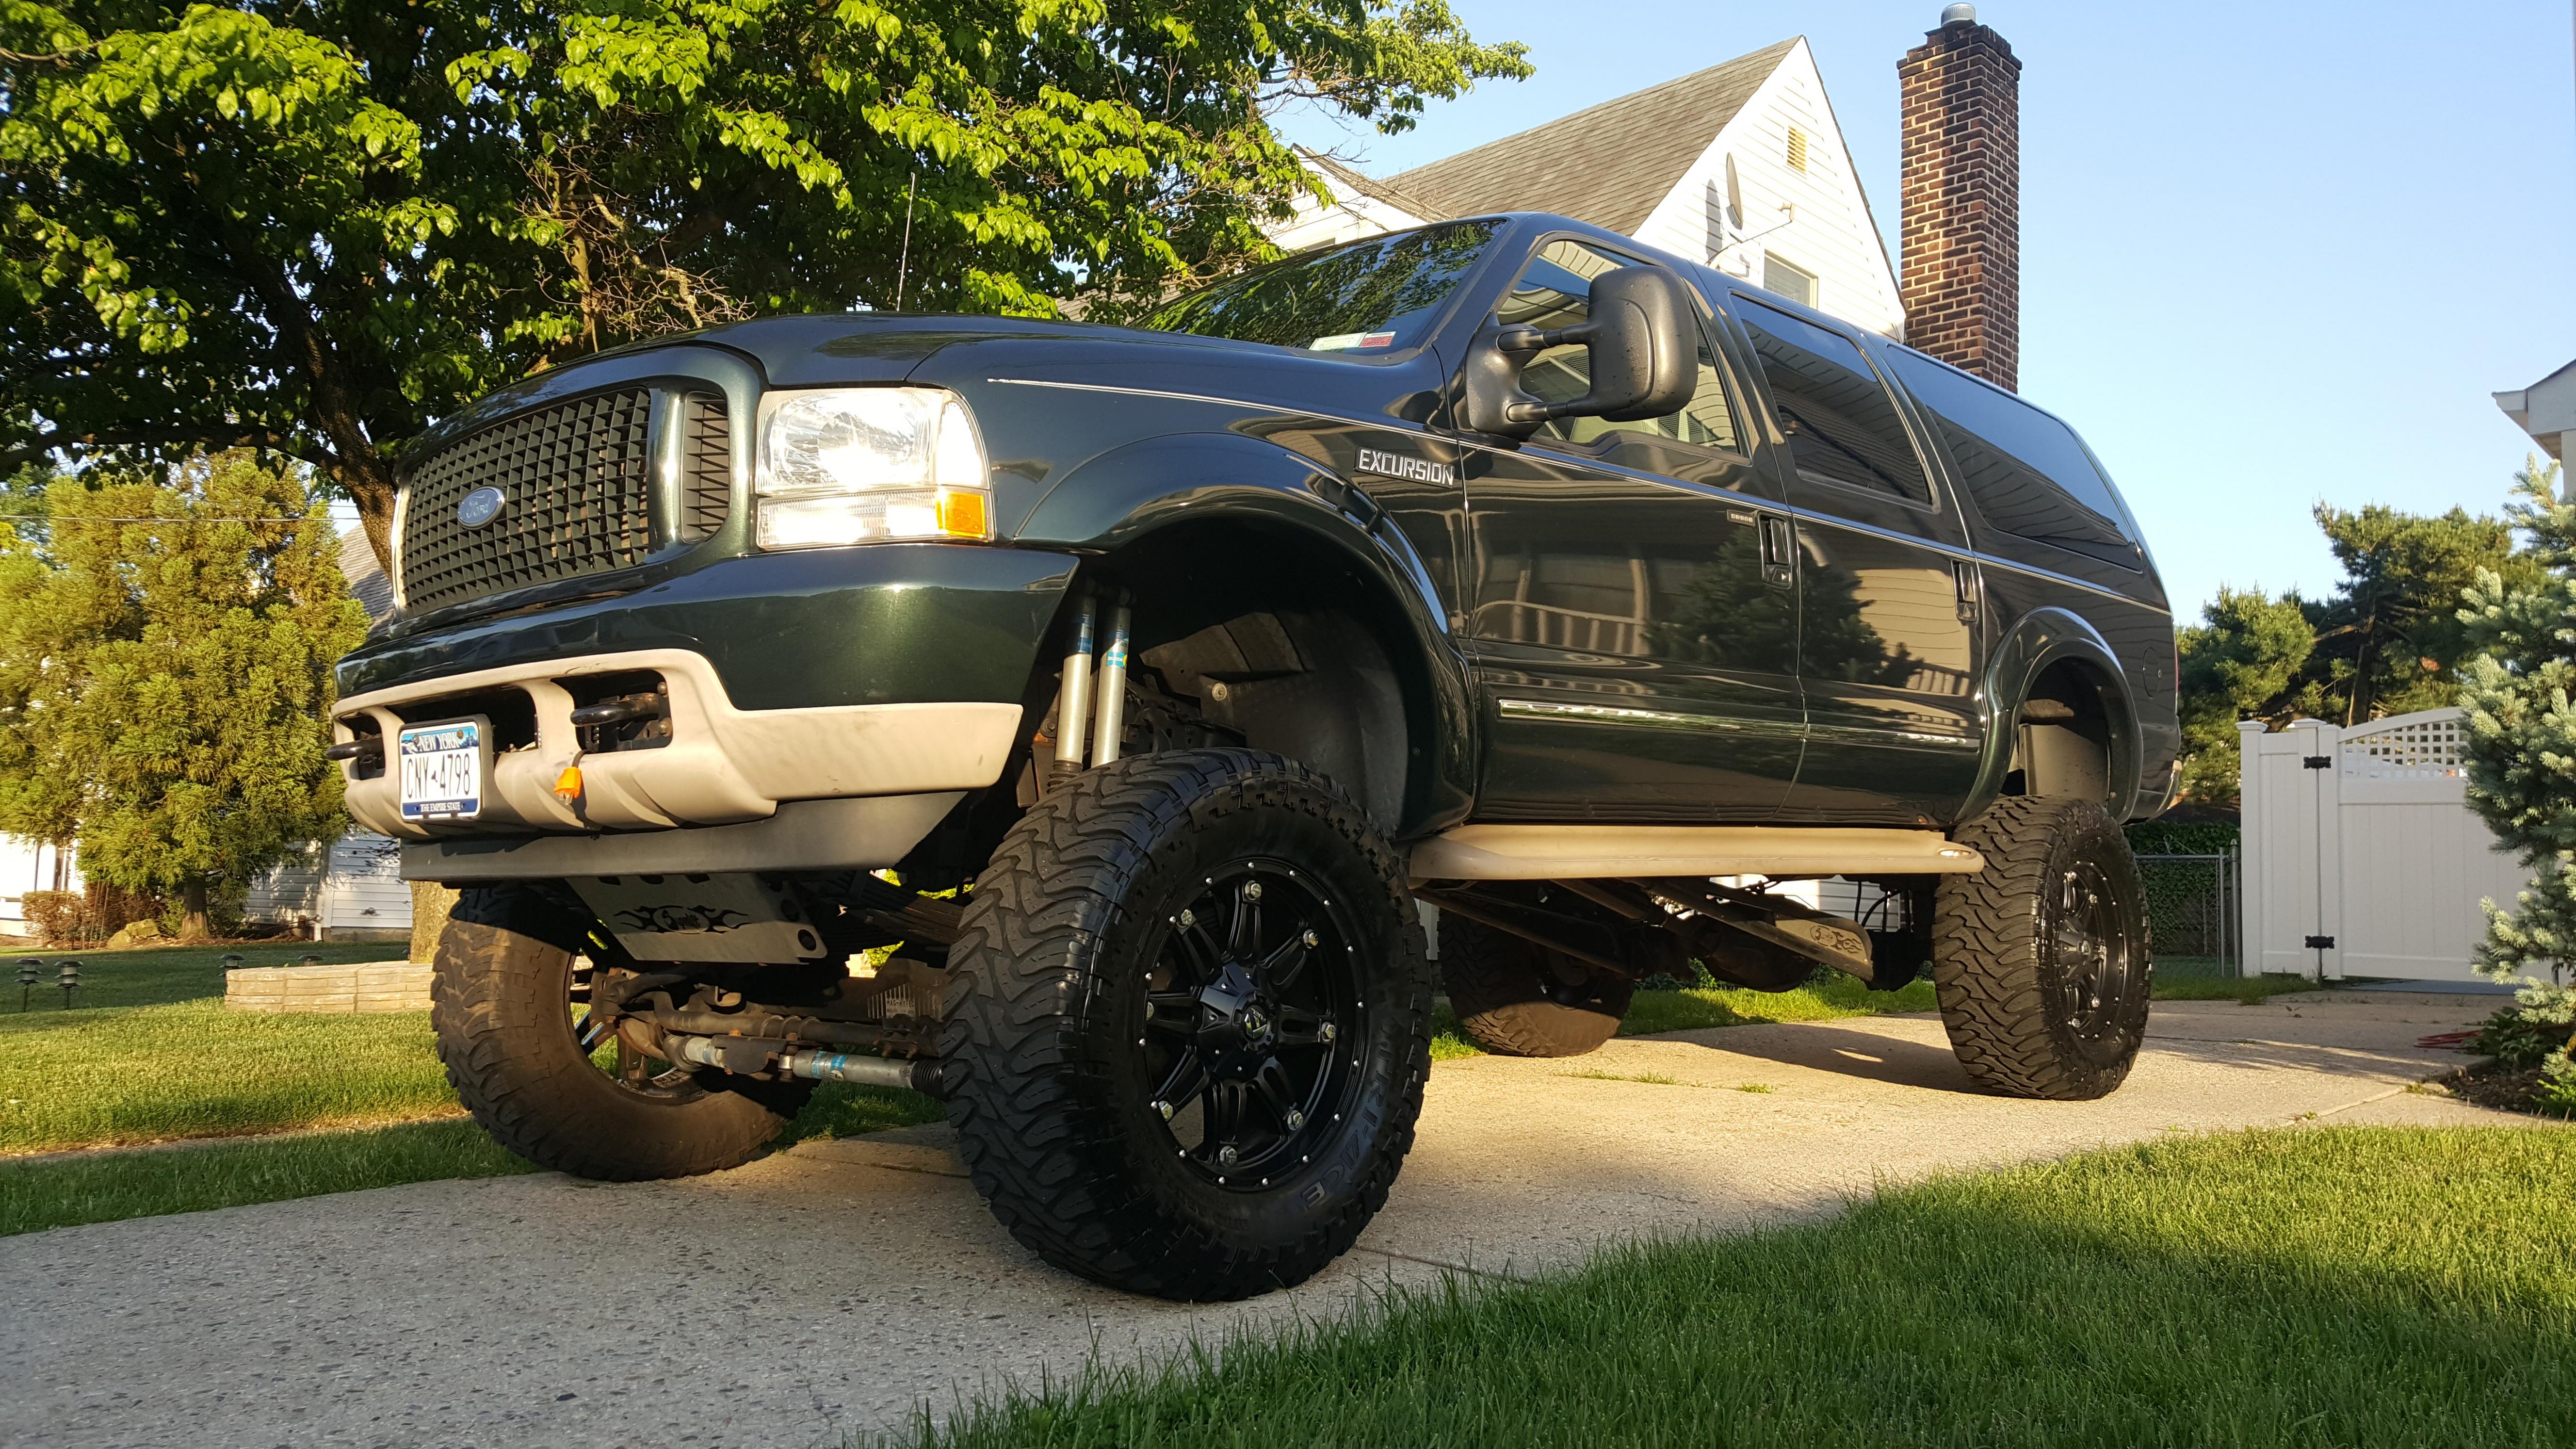 2003 Ford Excursion for sale 7.3 Turbo Diesel, Lifted, Many upgrades